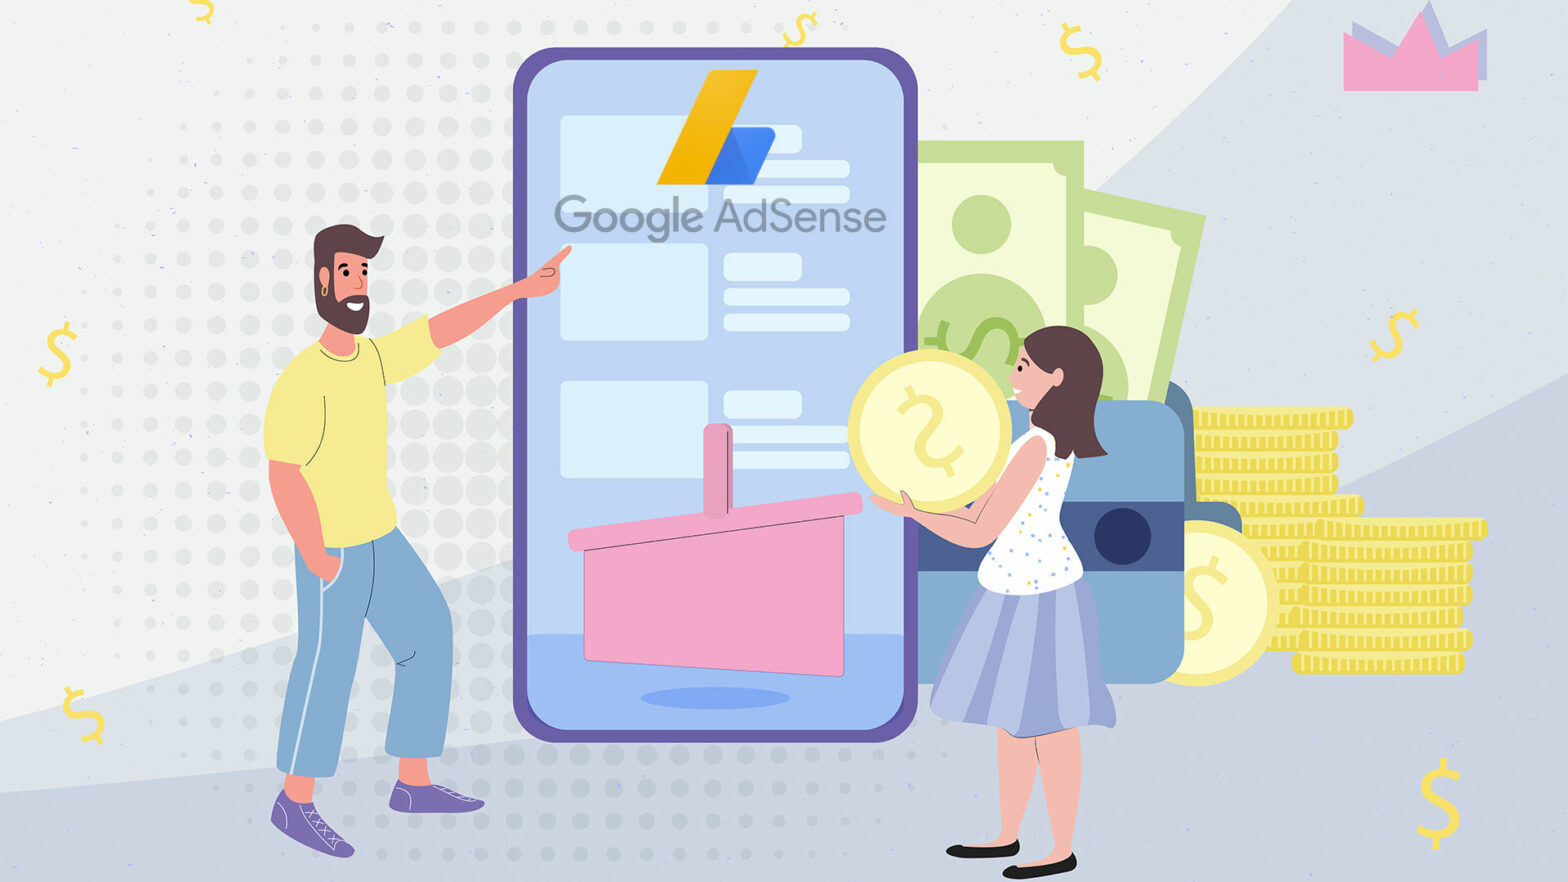 How to Change AdSense Accounts When Buying Or Selling Websites